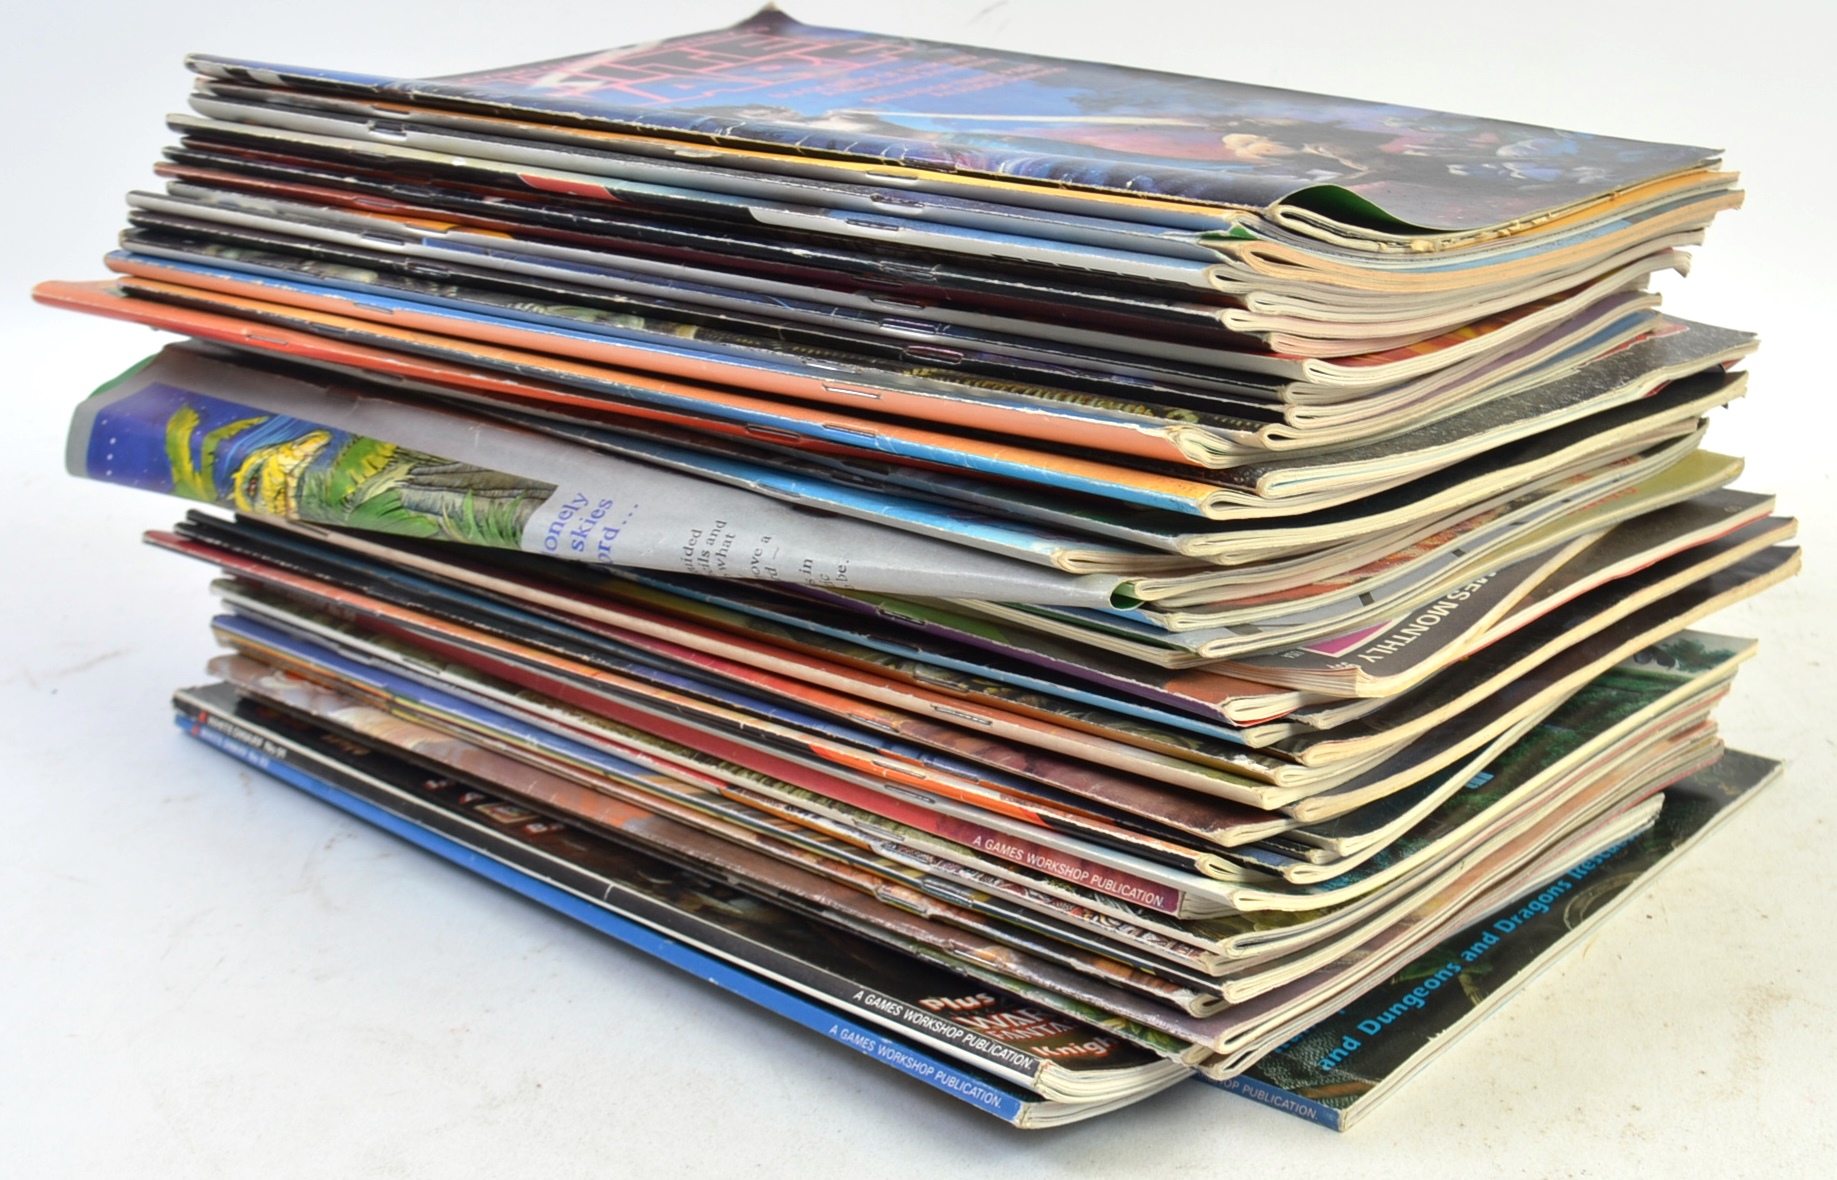 WHITE DWARF; A collection of 40+ vintage White Dwarf Role Playing Games magazines.